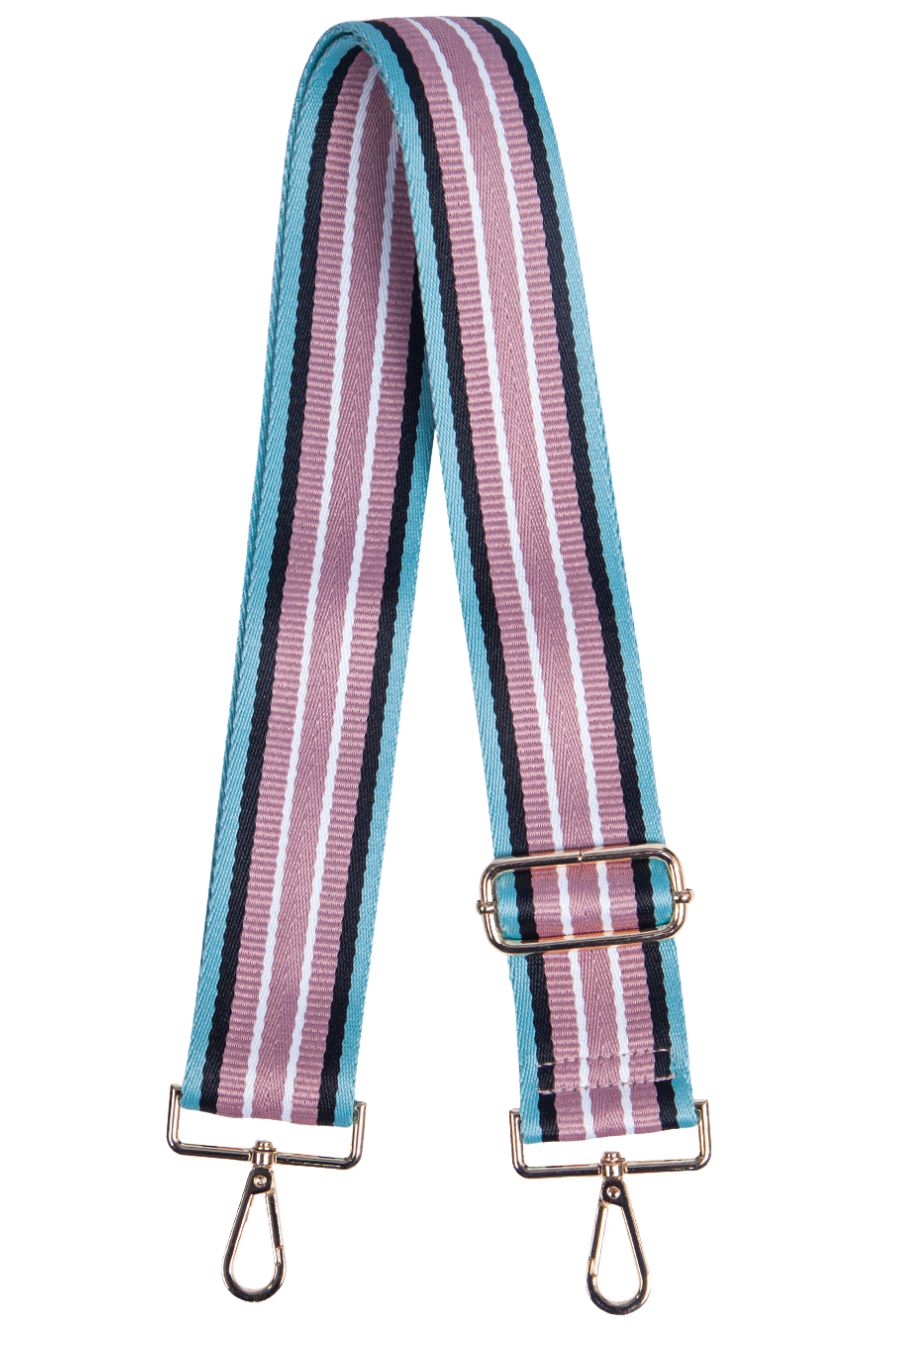 pink, white, blue and black striped crossbody bag strap, clip on, with gold hardware